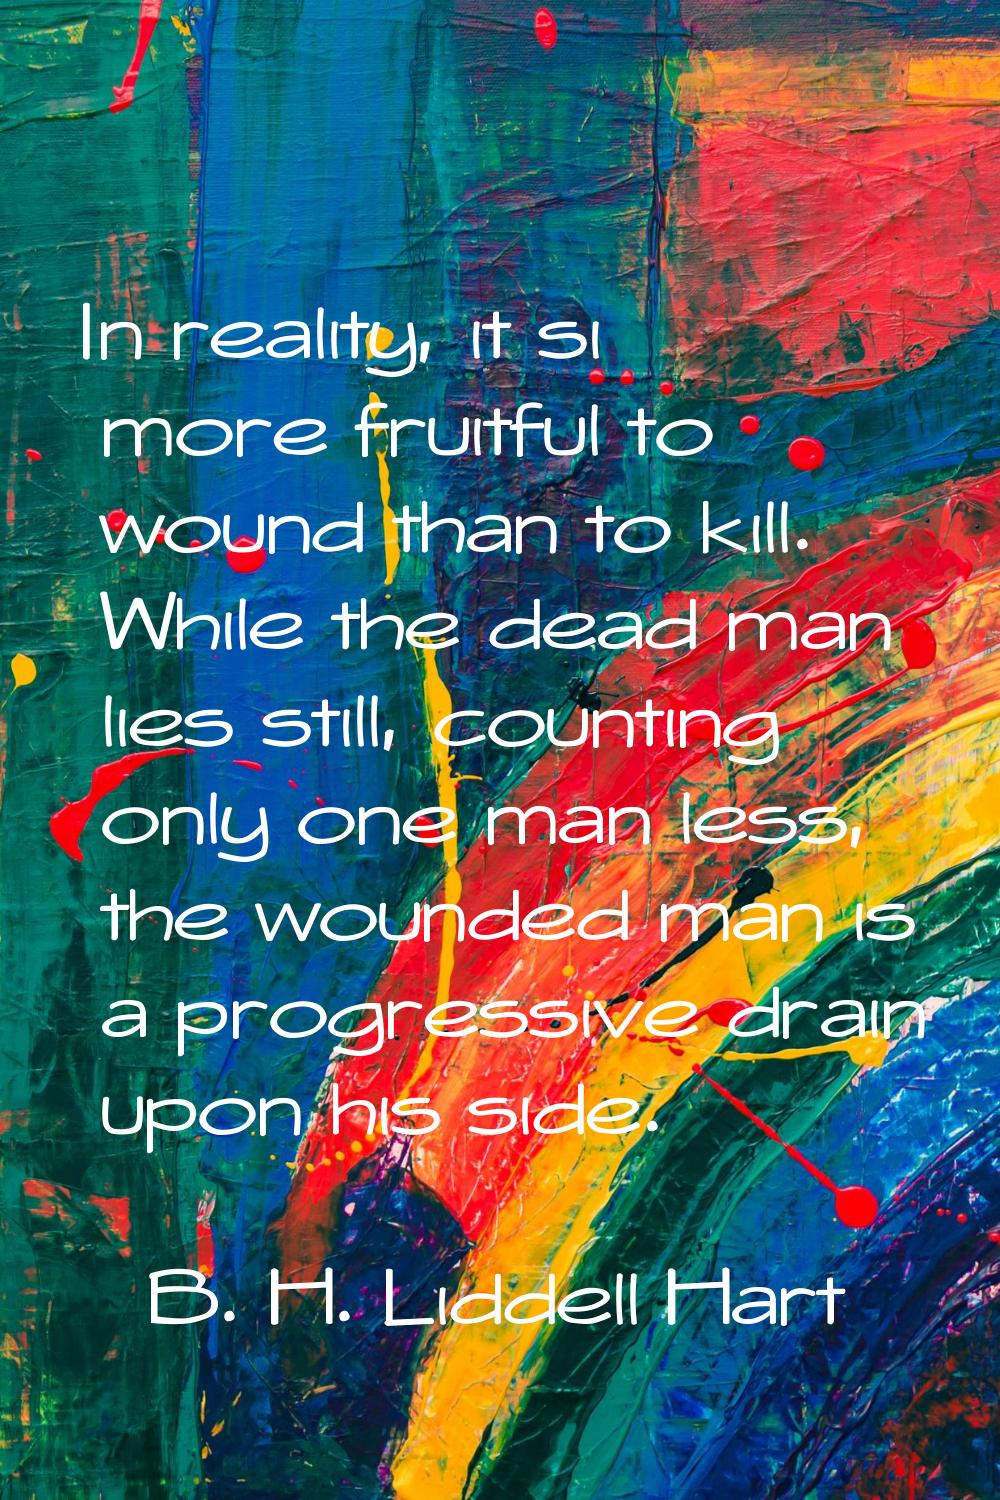 In reality, it si more fruitful to wound than to kill. While the dead man lies still, counting only